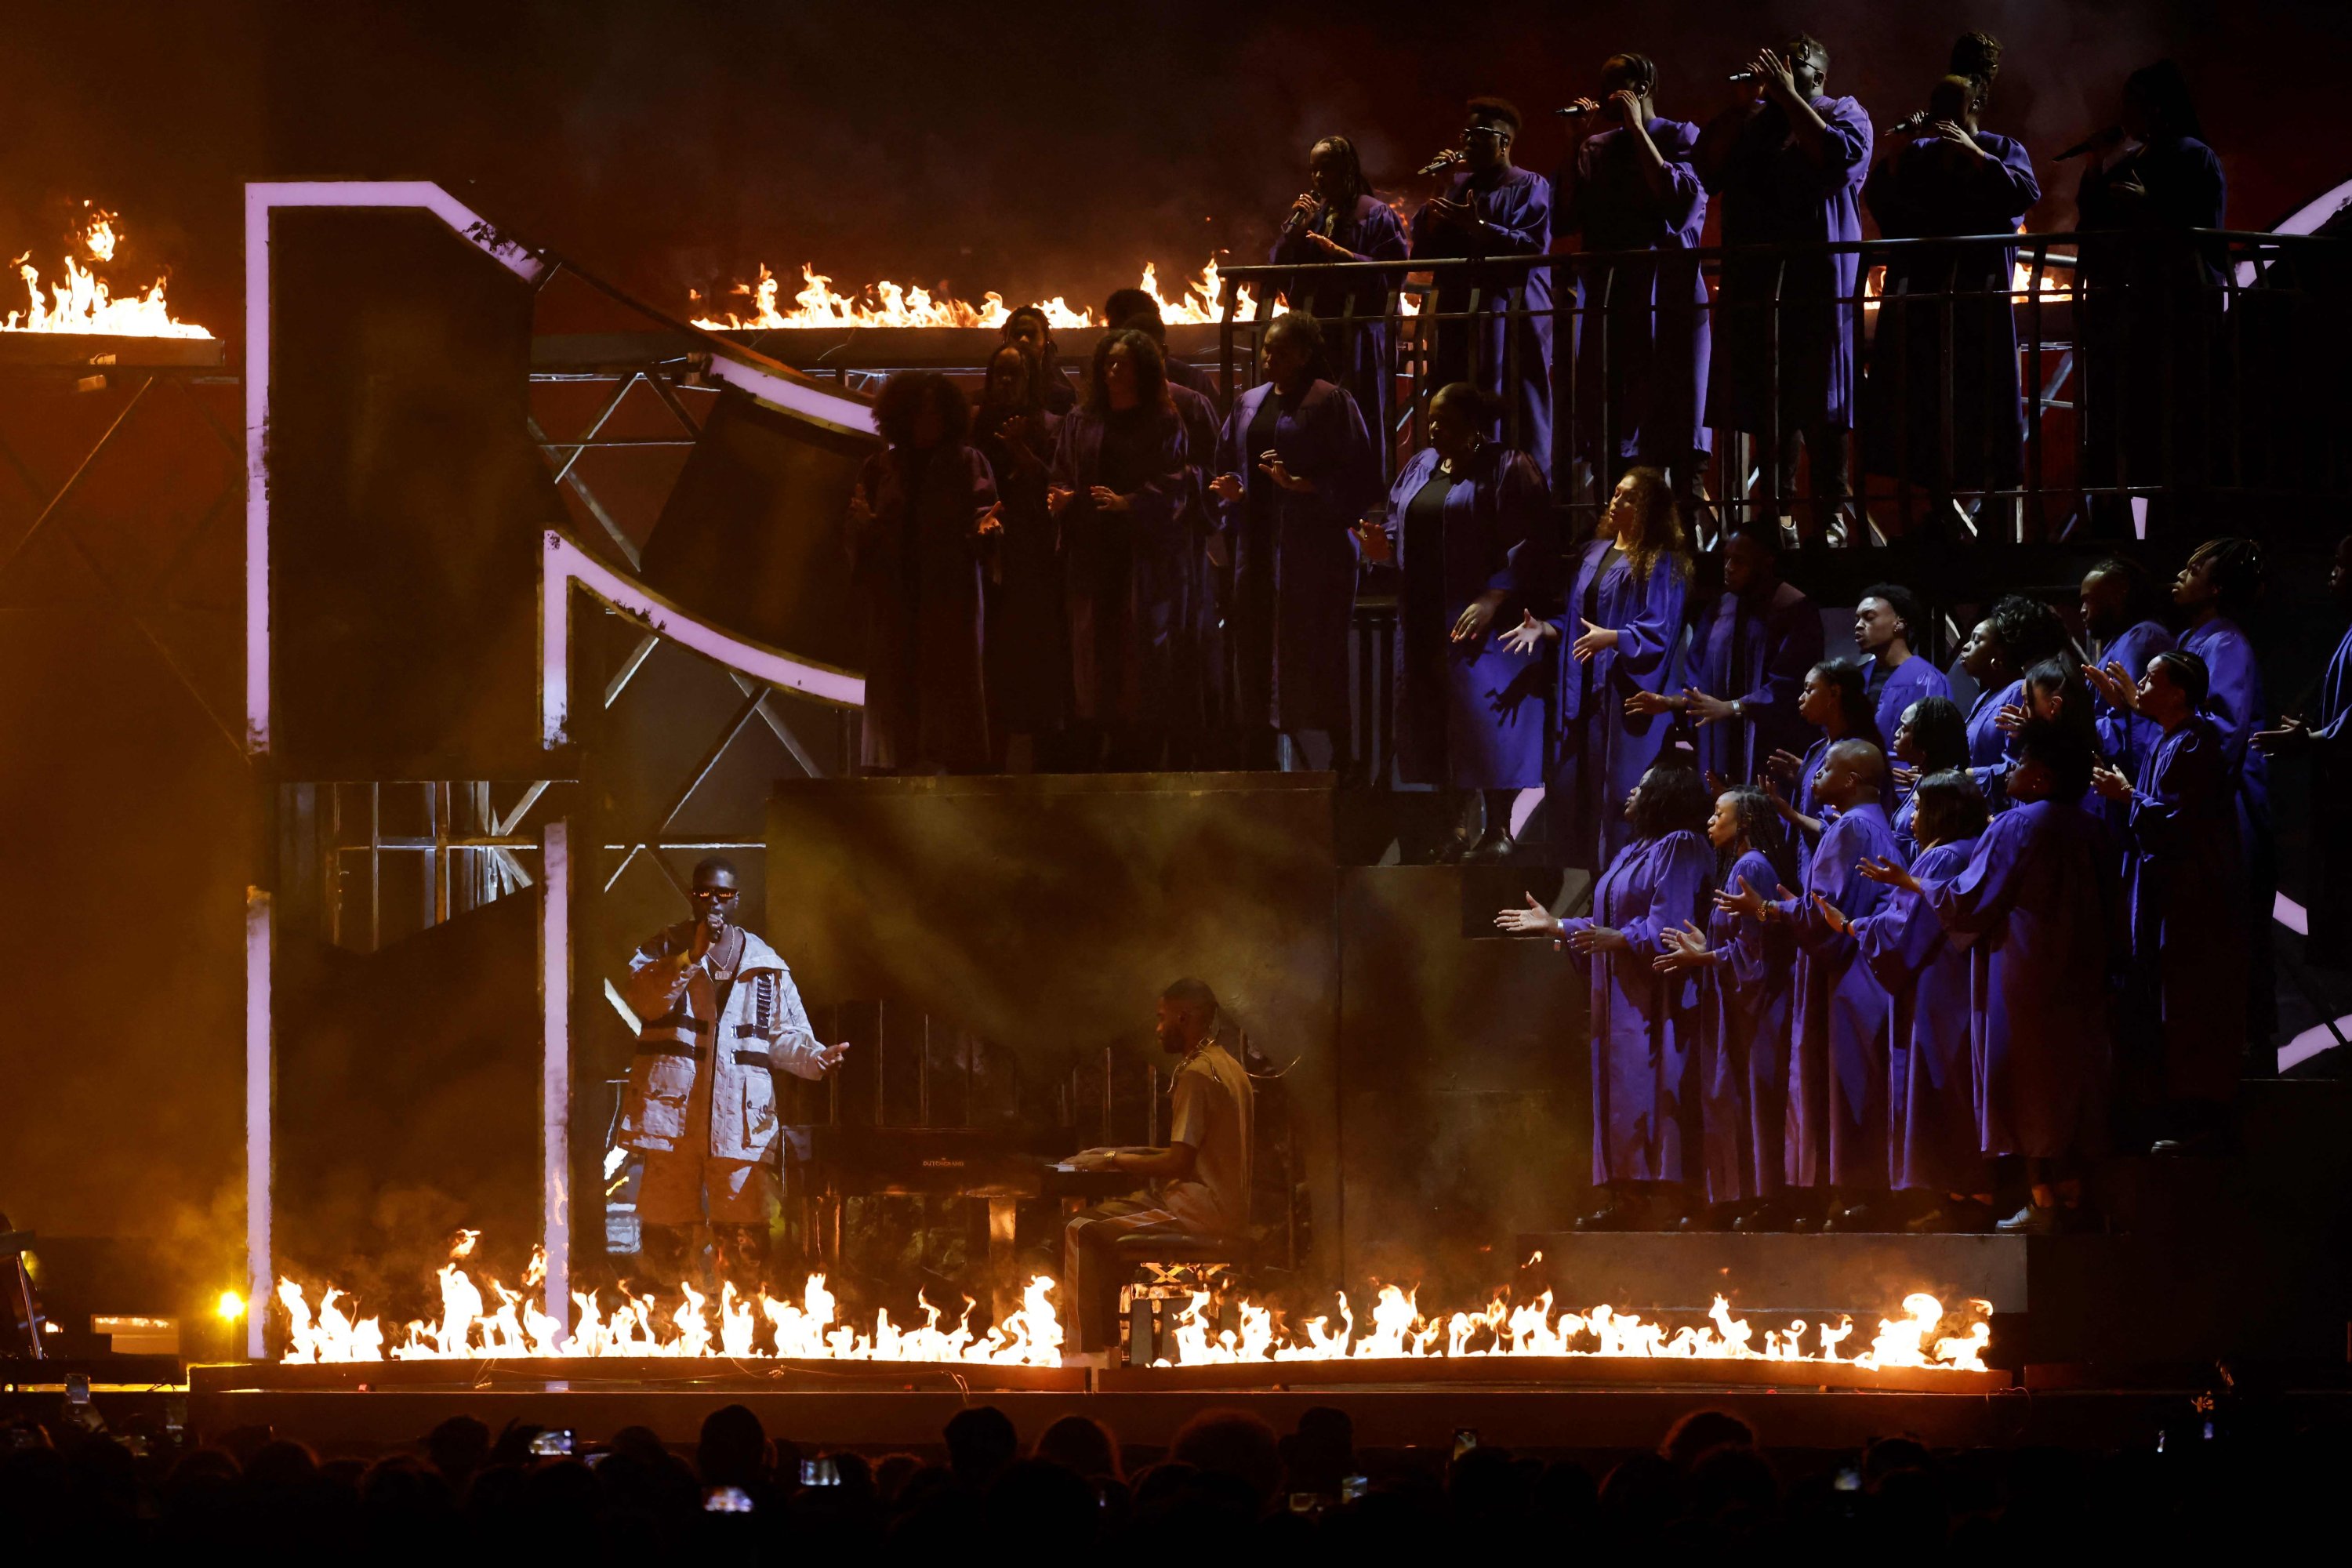 British rapper David Orobosa Omoregie aka Dave performs during the BRIT Awards 2022 ceremony and live show in London, Britain, Feb. 8, 2022. (AFP)